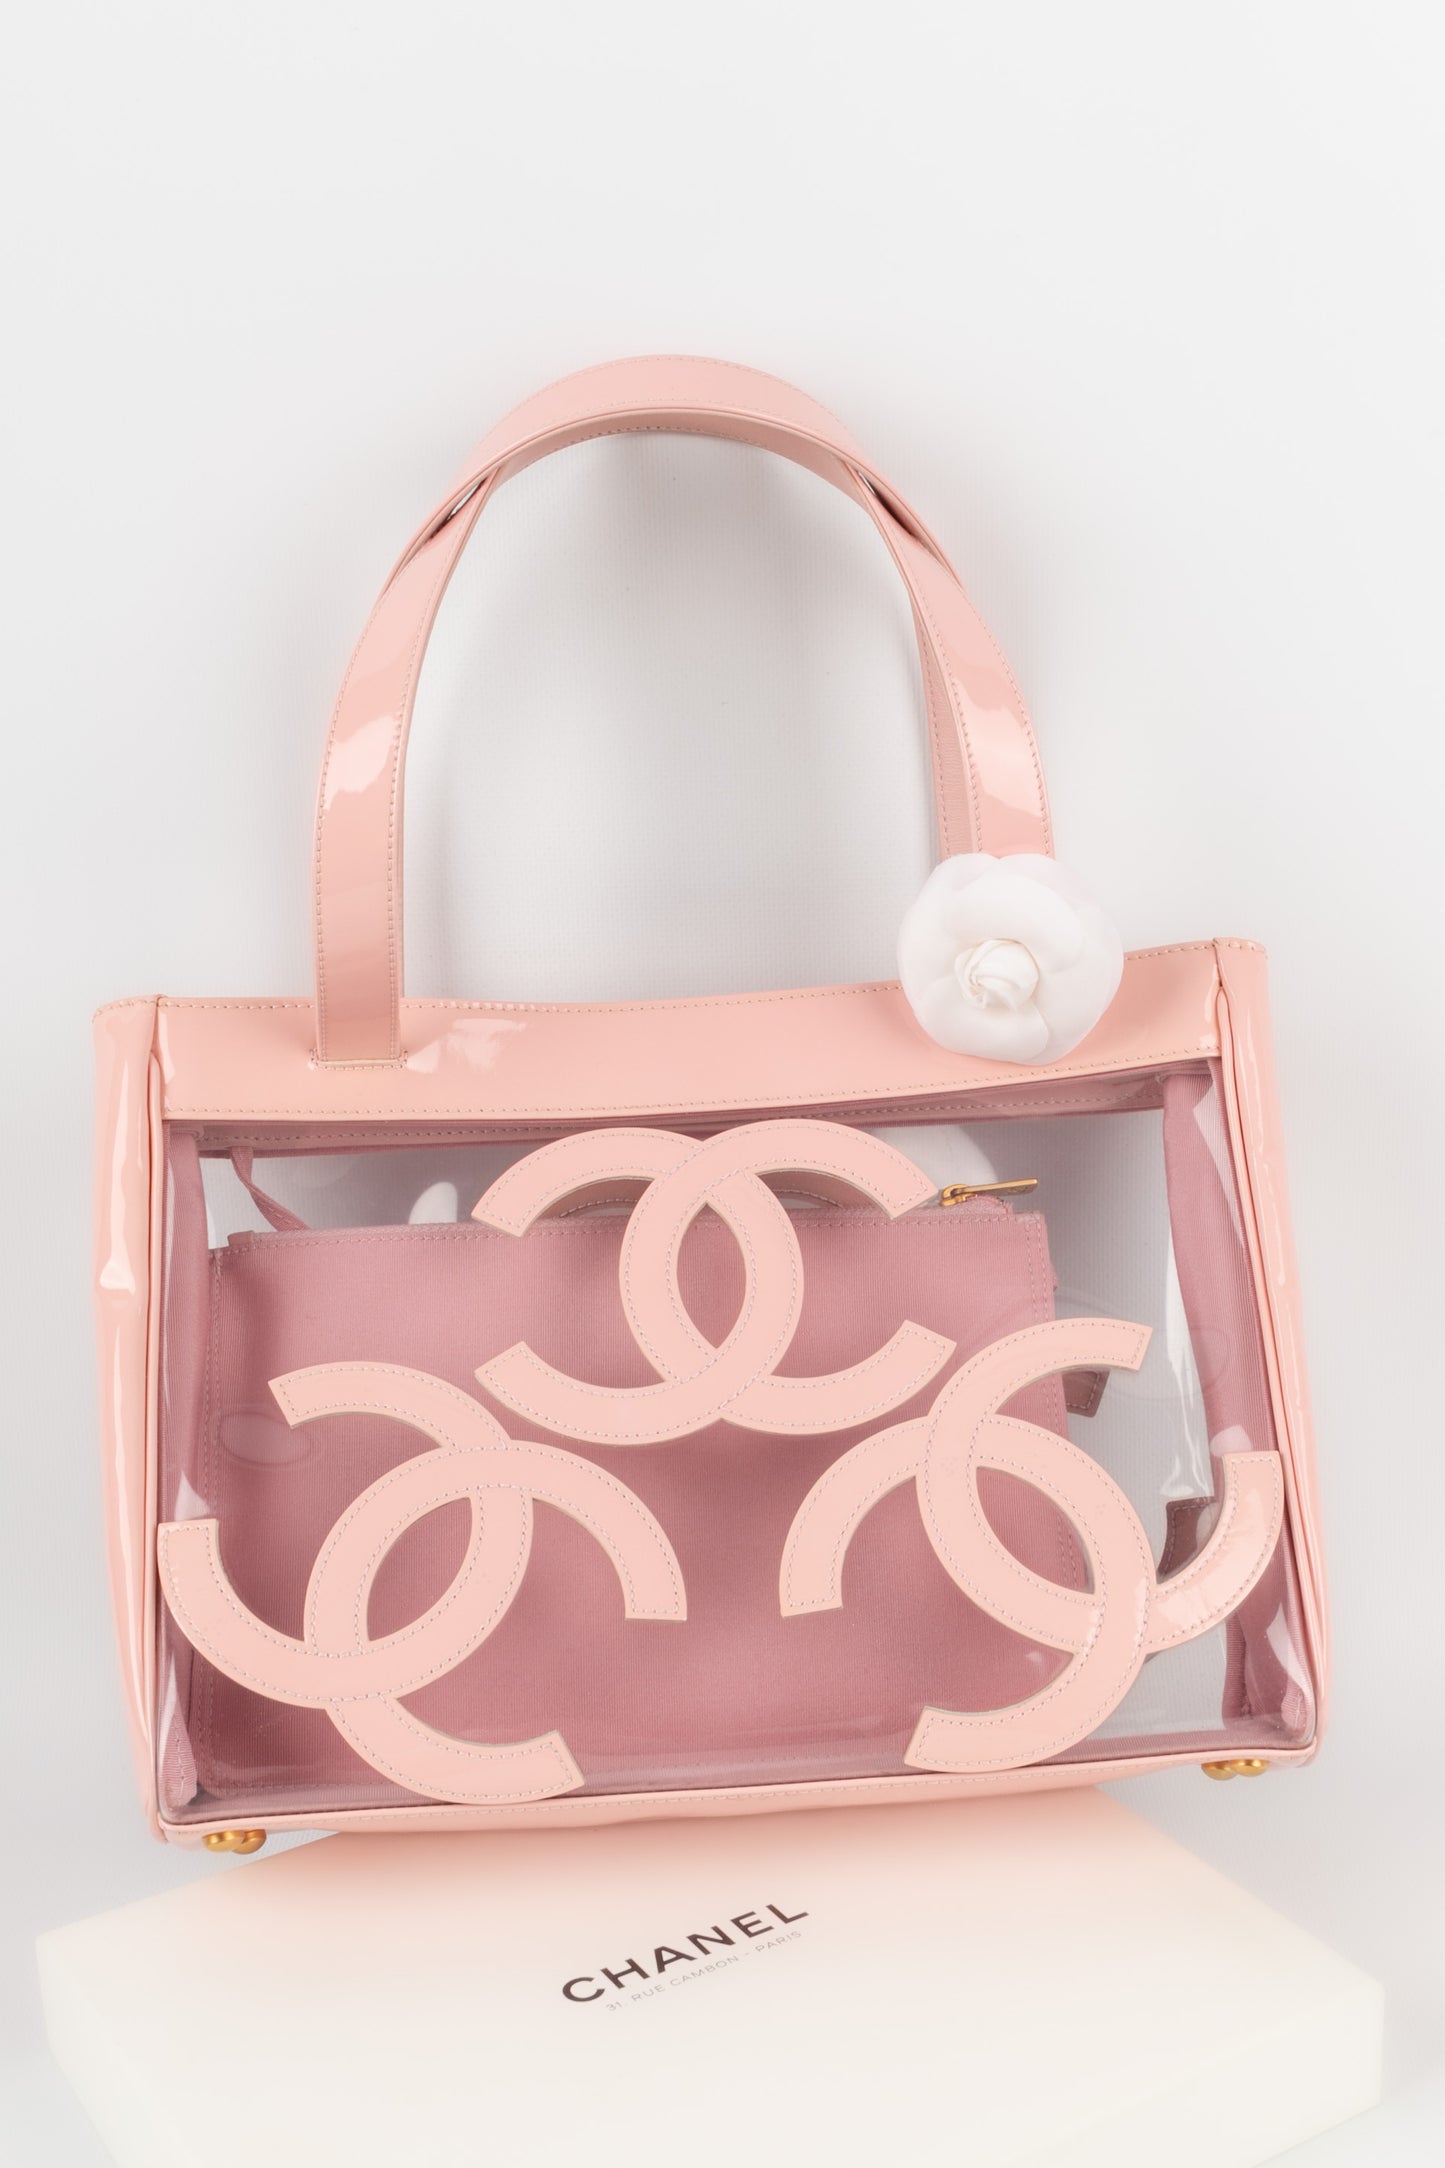 Chanel CC pink and transparent leather and pvc Shopping Bag.